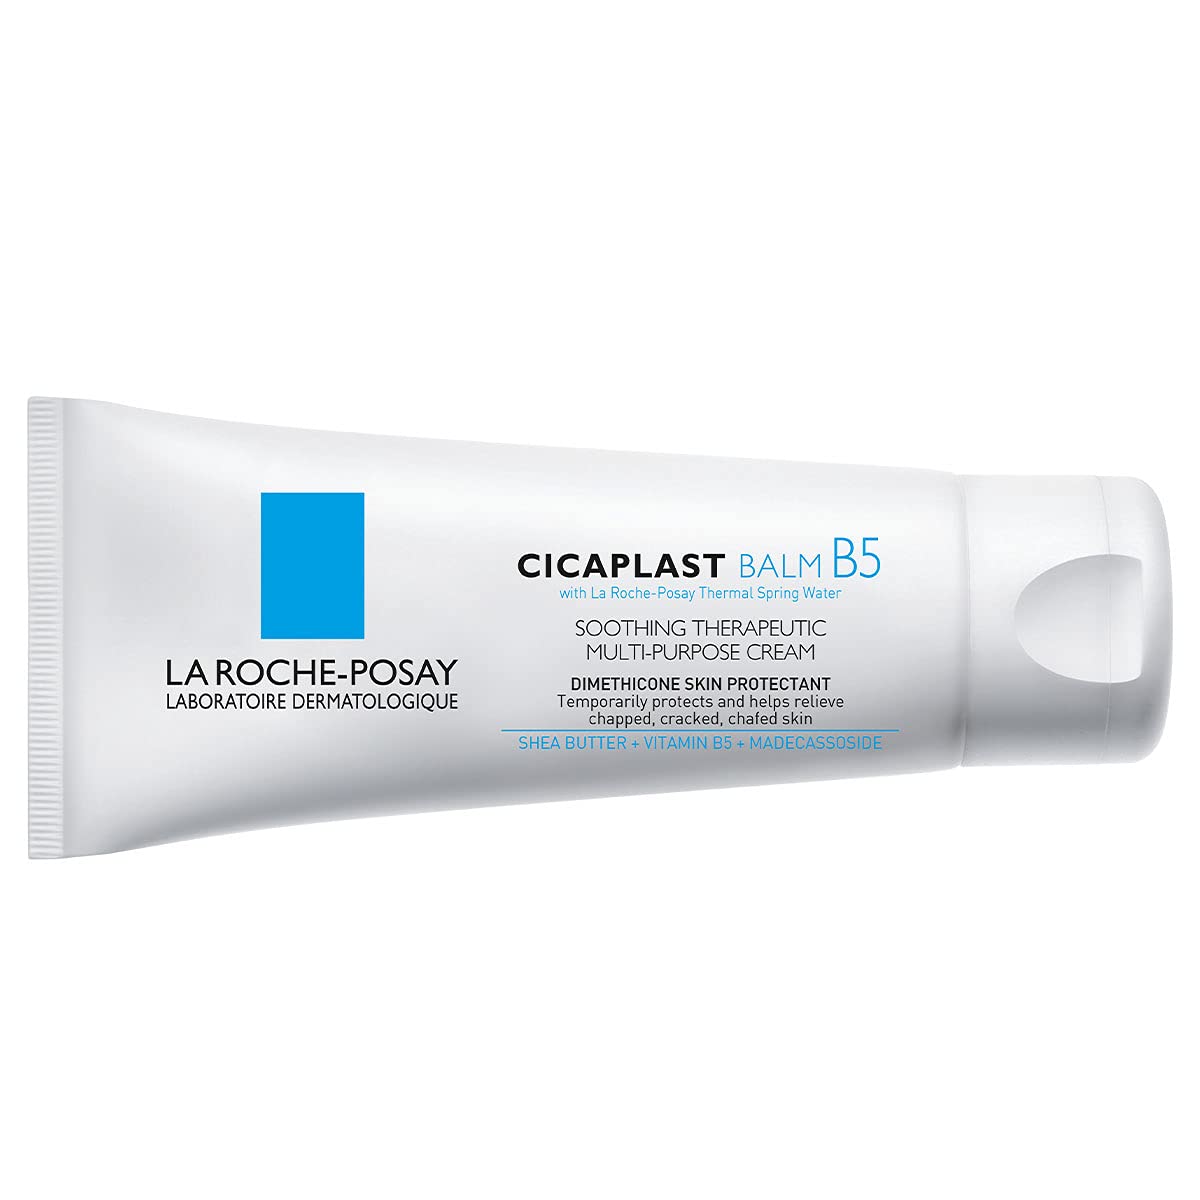 A tube of La Roche-Posay Cicaplast Balm B5 for dry skin